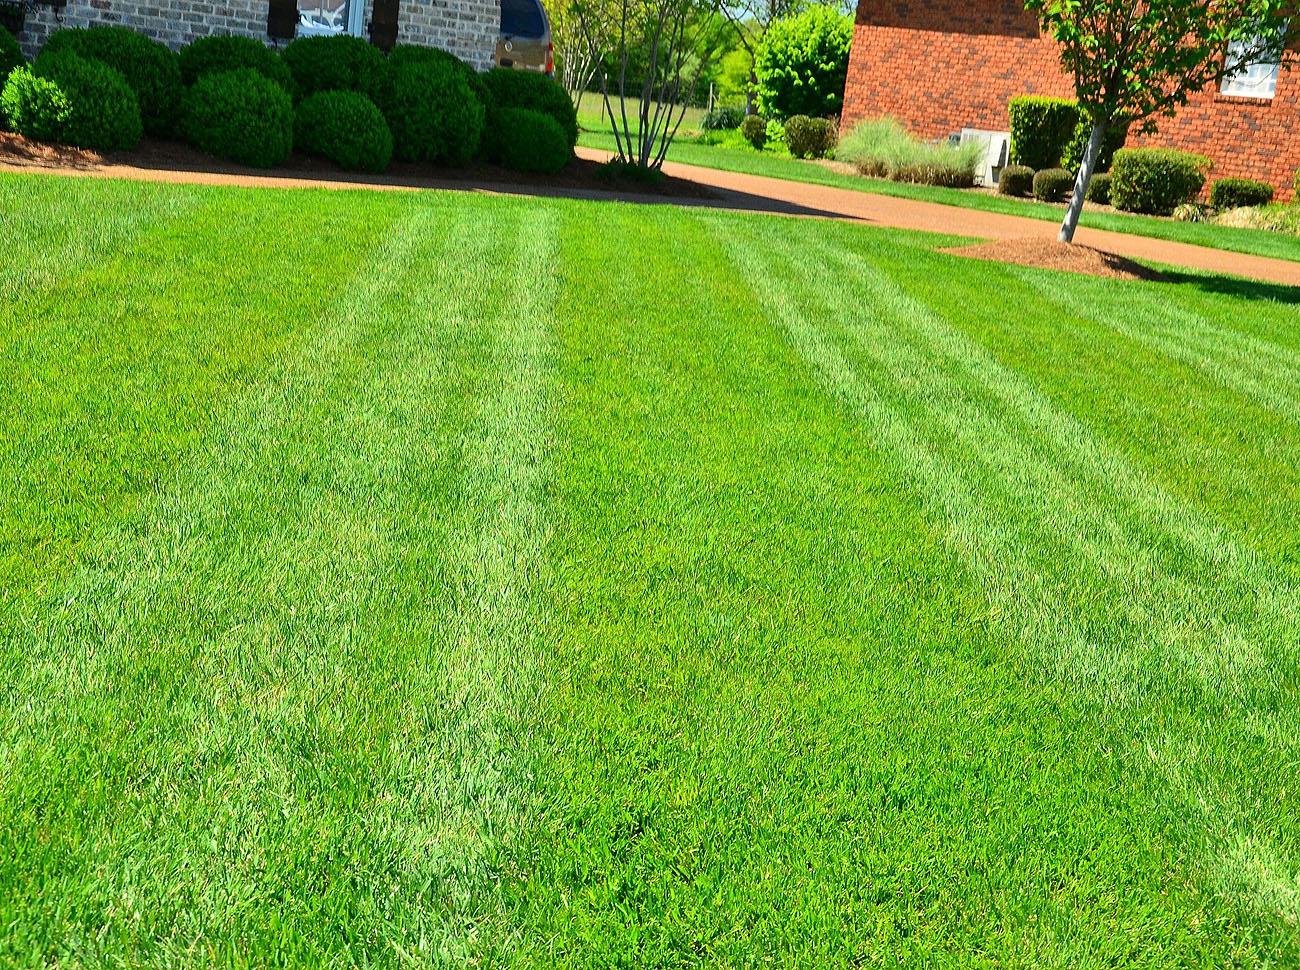 Grass cutting and lawn mowing services for residential and commercial properties in buckinghamshire, bedfordshire and hertfordshire including pest control, hedge cutting, tree maintenance and wild flower planting